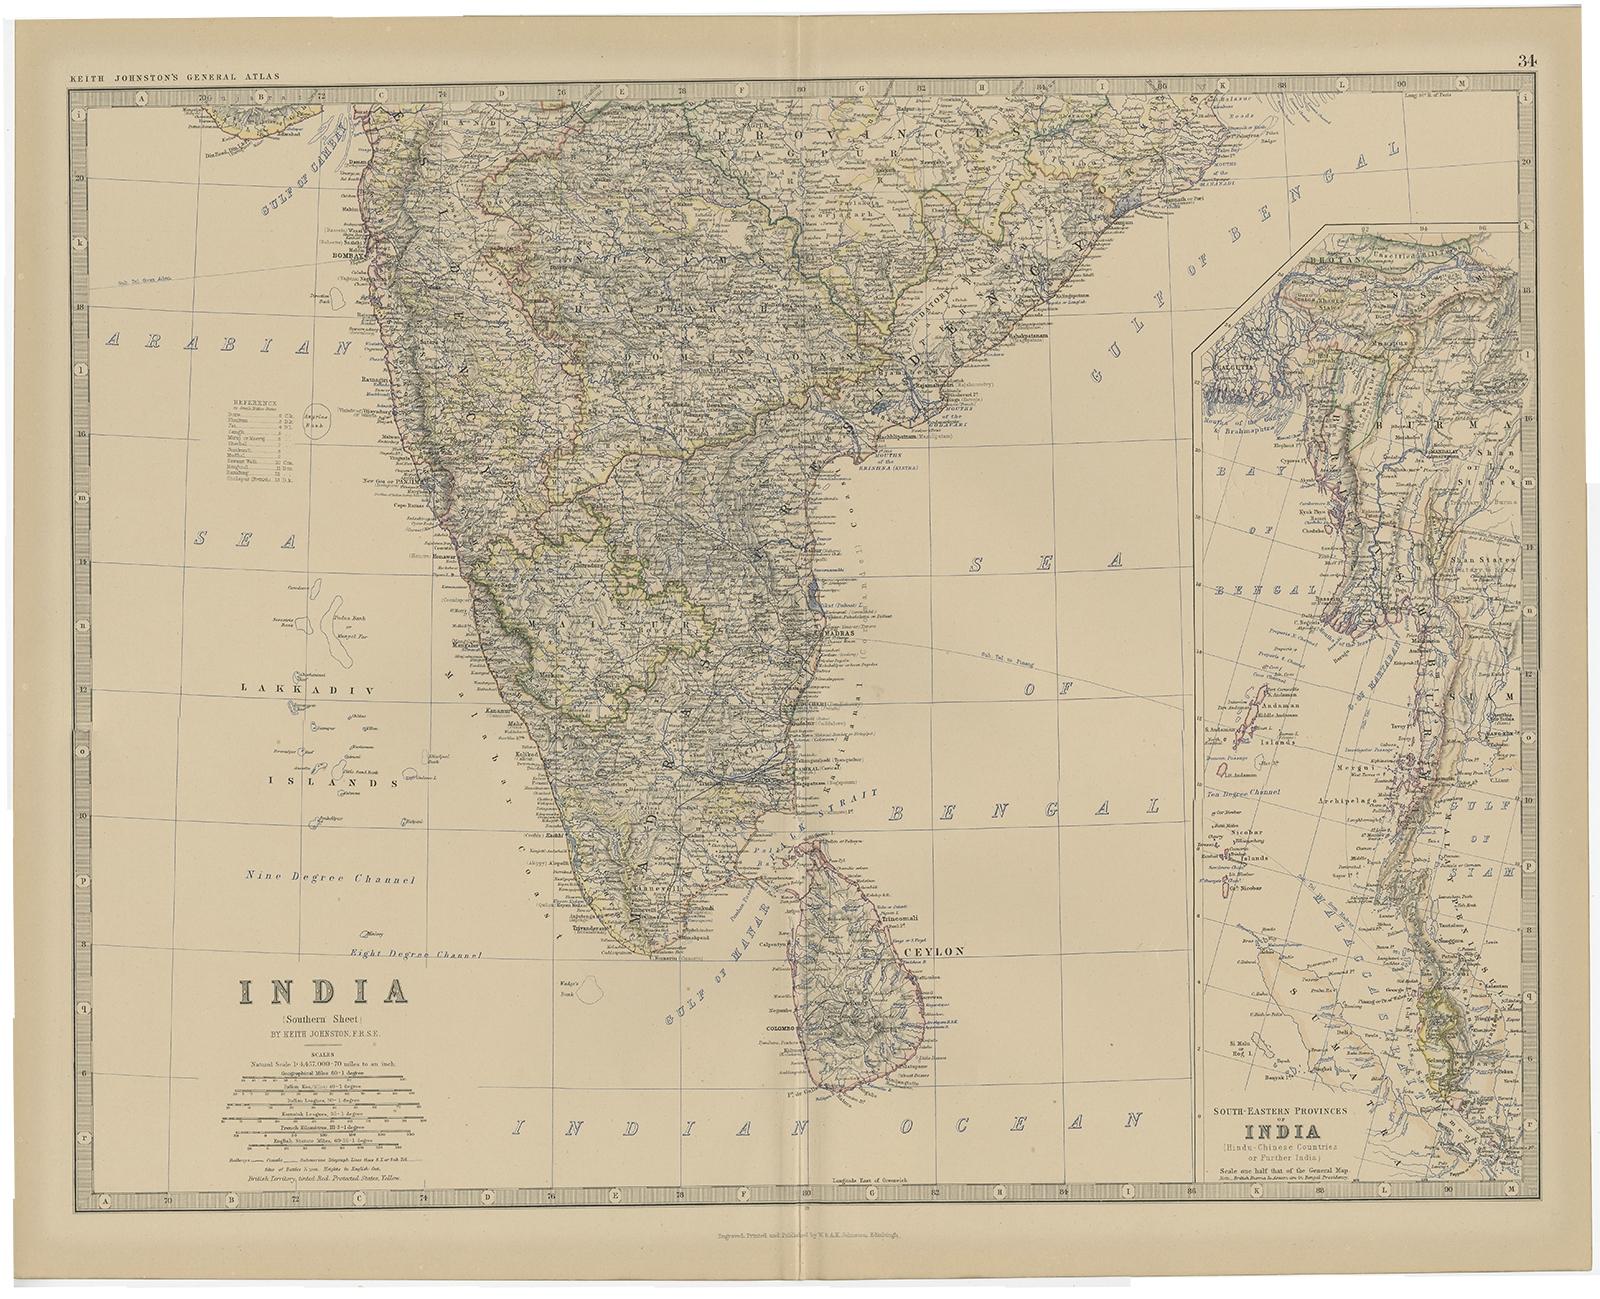 Antique map titled 'India (Southern Sheet)'. 

Old map of Southern India and Ceylon (Sri Lanka). With an inset map of the South-Eastern Provinces of India. This map originates from 'The Royal Atlas of Modern Geography, Exhibiting, in a Series of